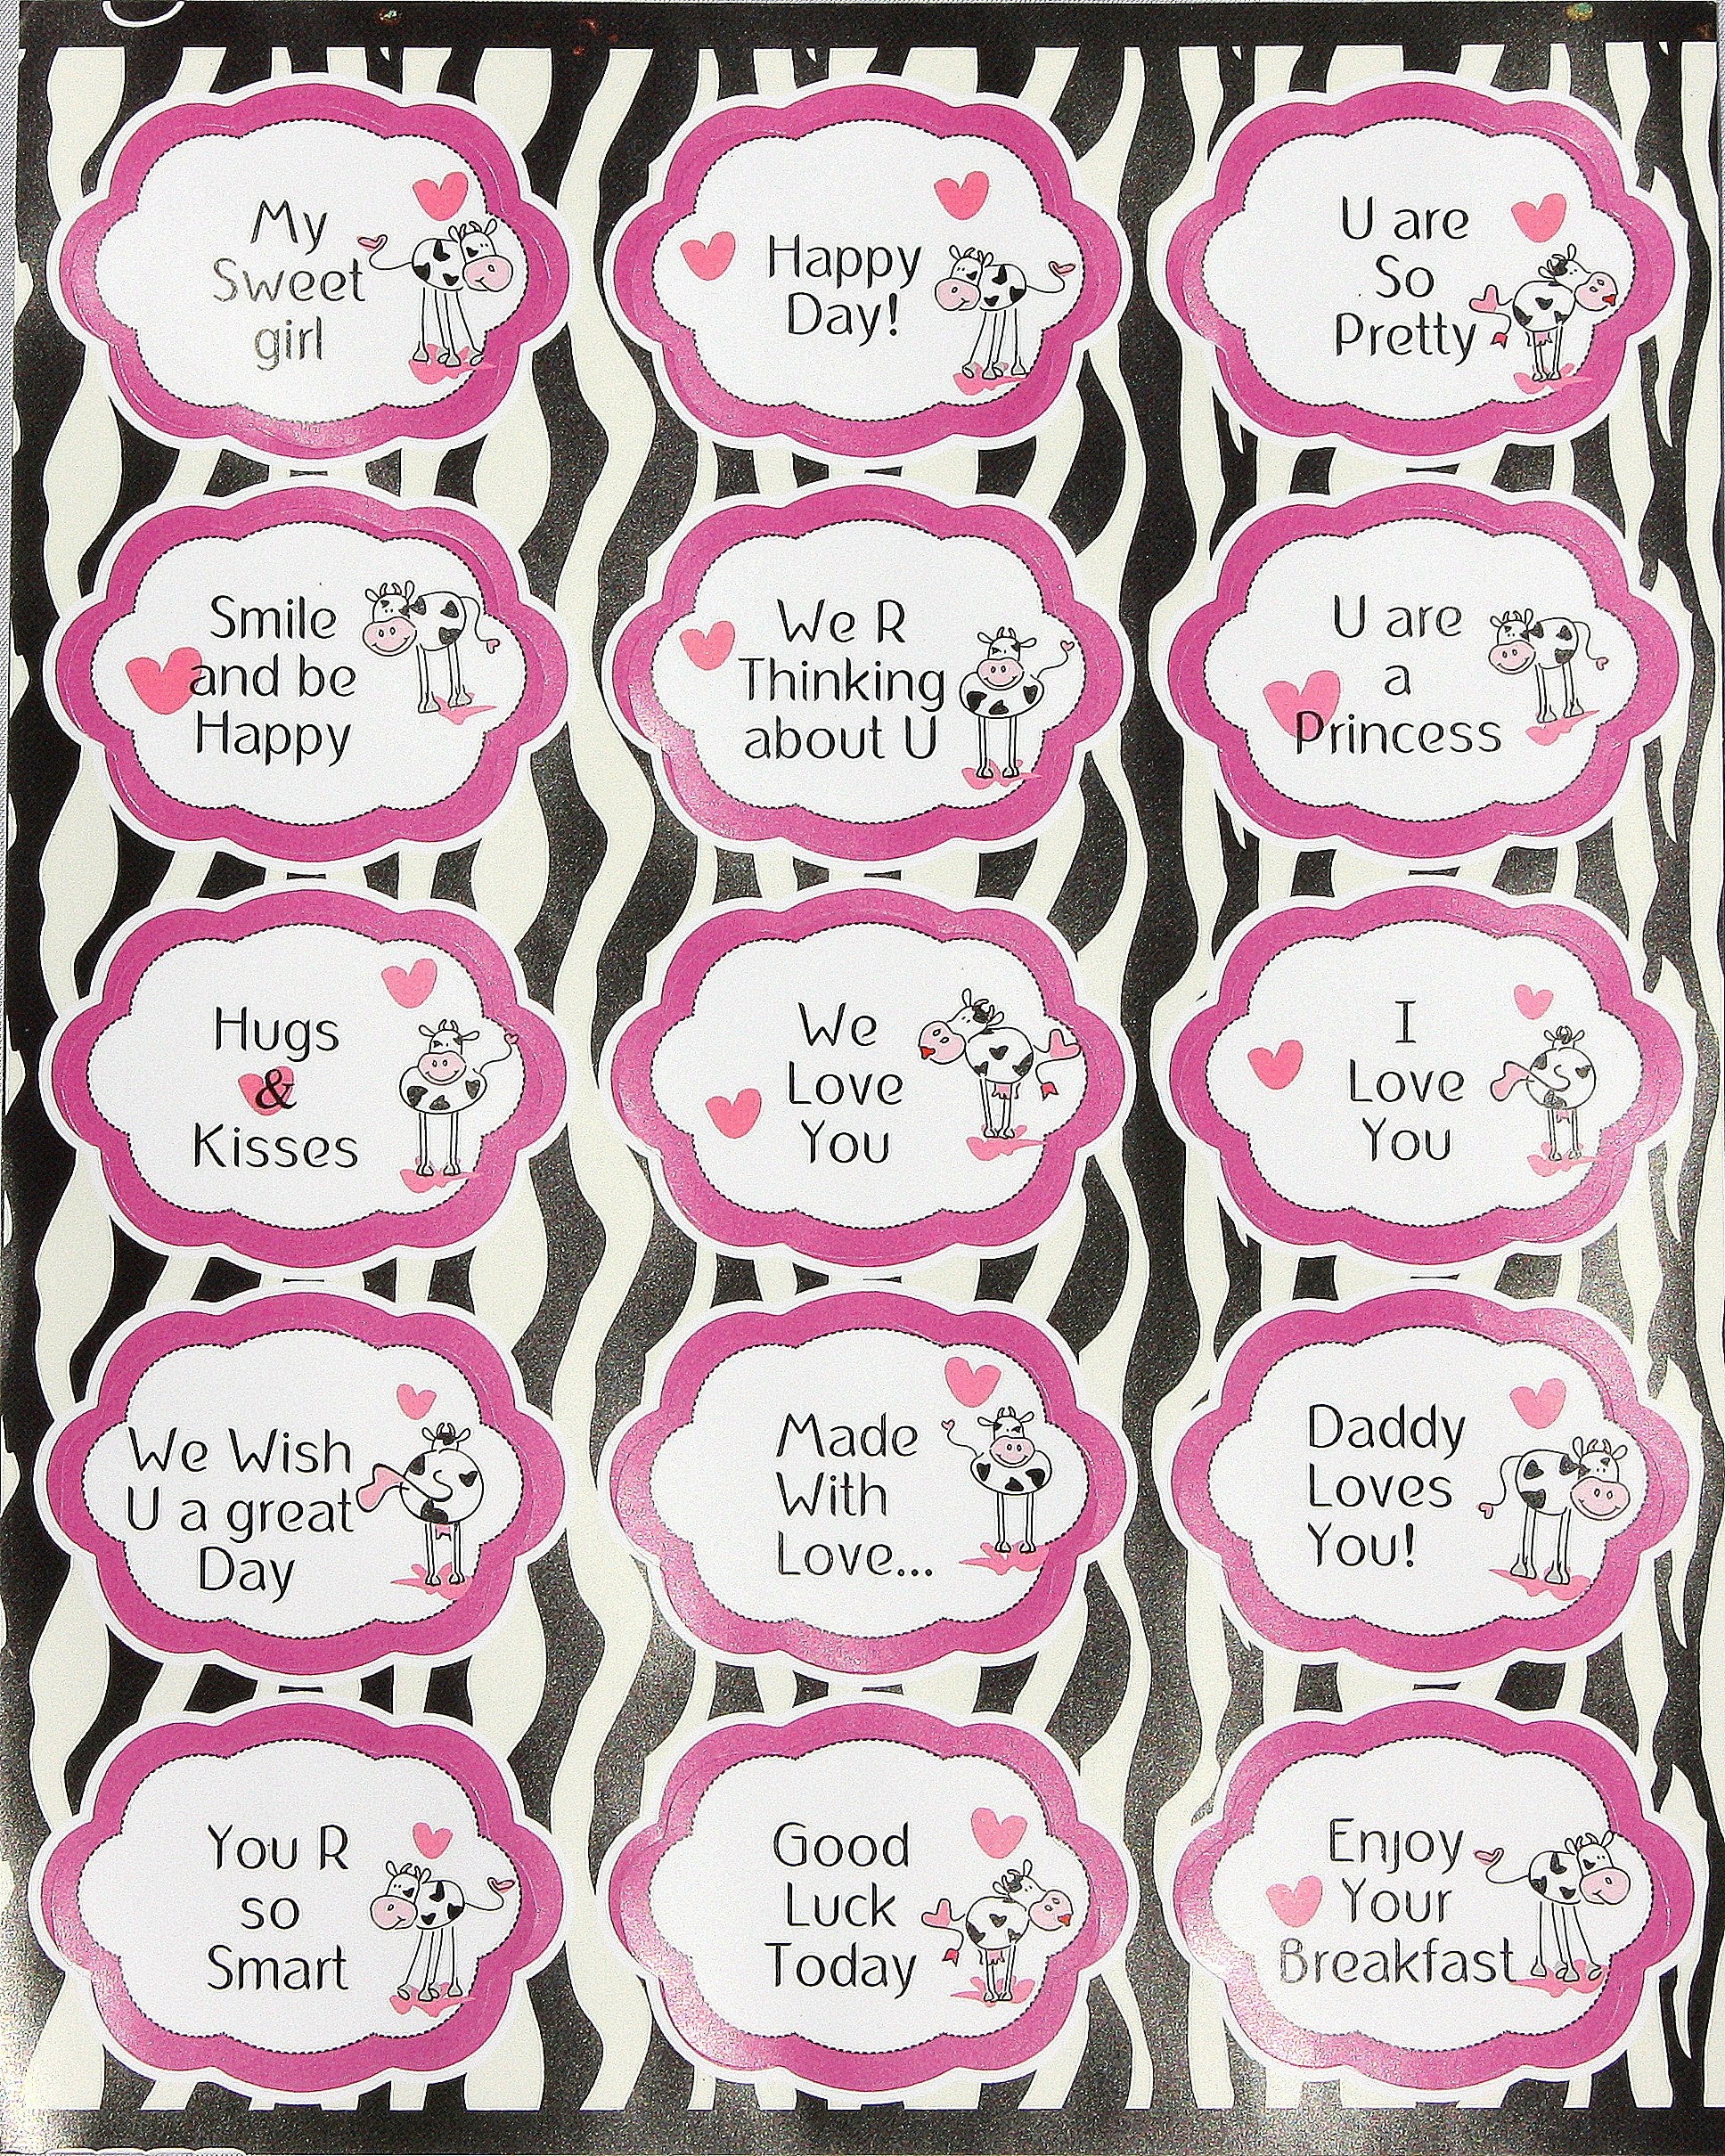 Fun Quote Stickers For Everyday Use - 15 Pack – Royal Green Market